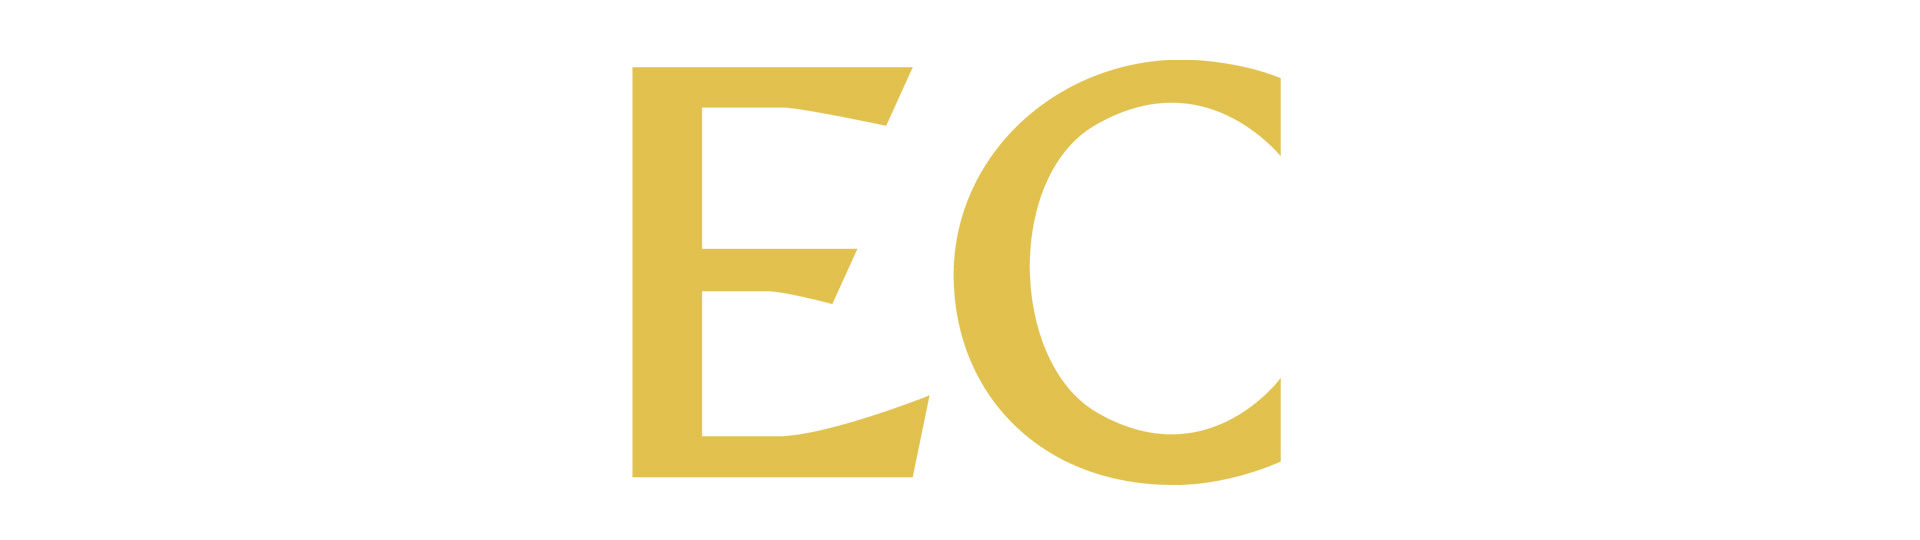 Large gold letters E and C, logo for EC Bid.